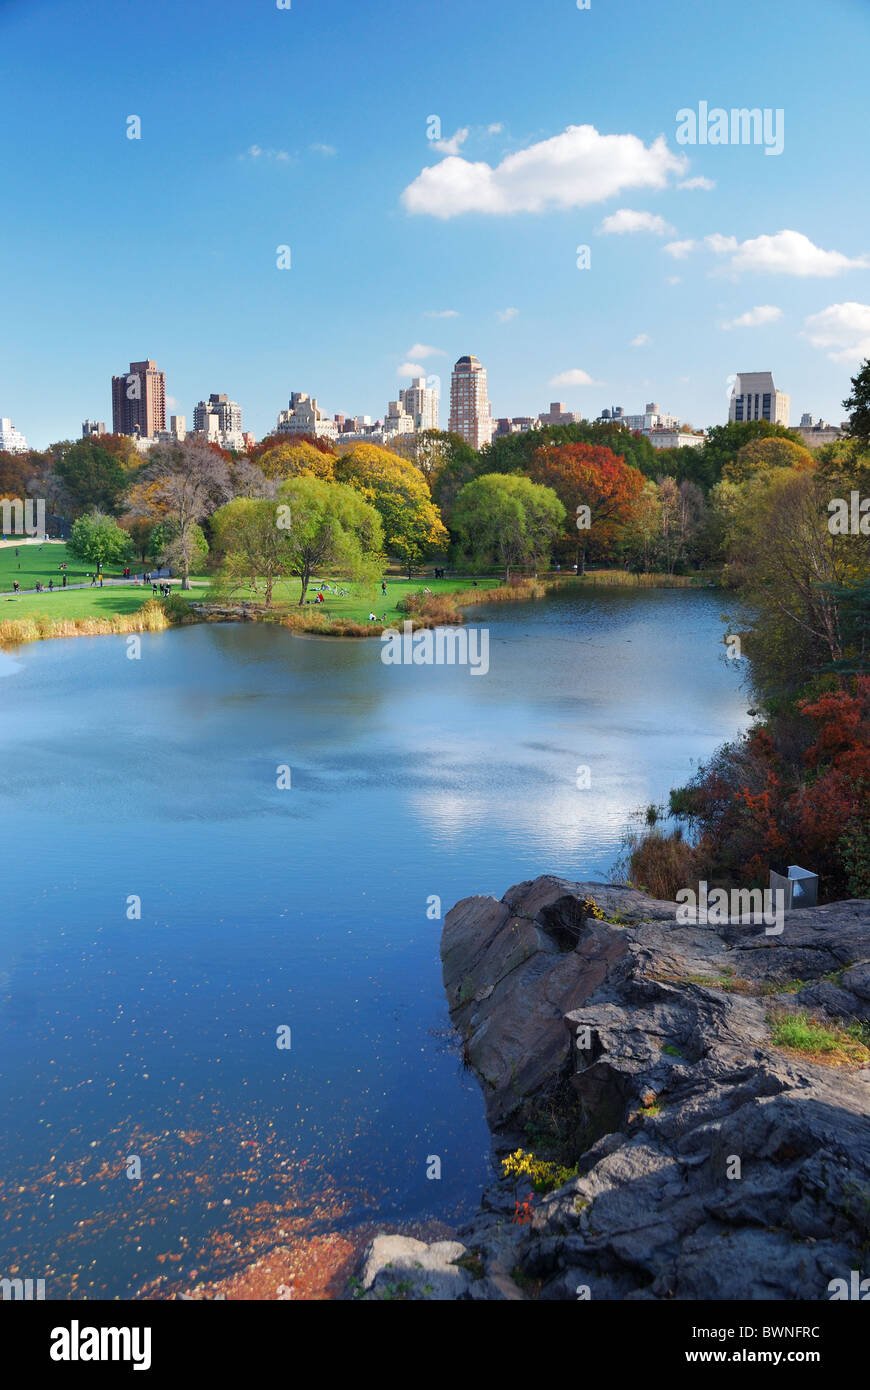 New York City Central Park in Autumn with Manhattan skyscrapers and colorful trees over lake with reflection. Stock Photo